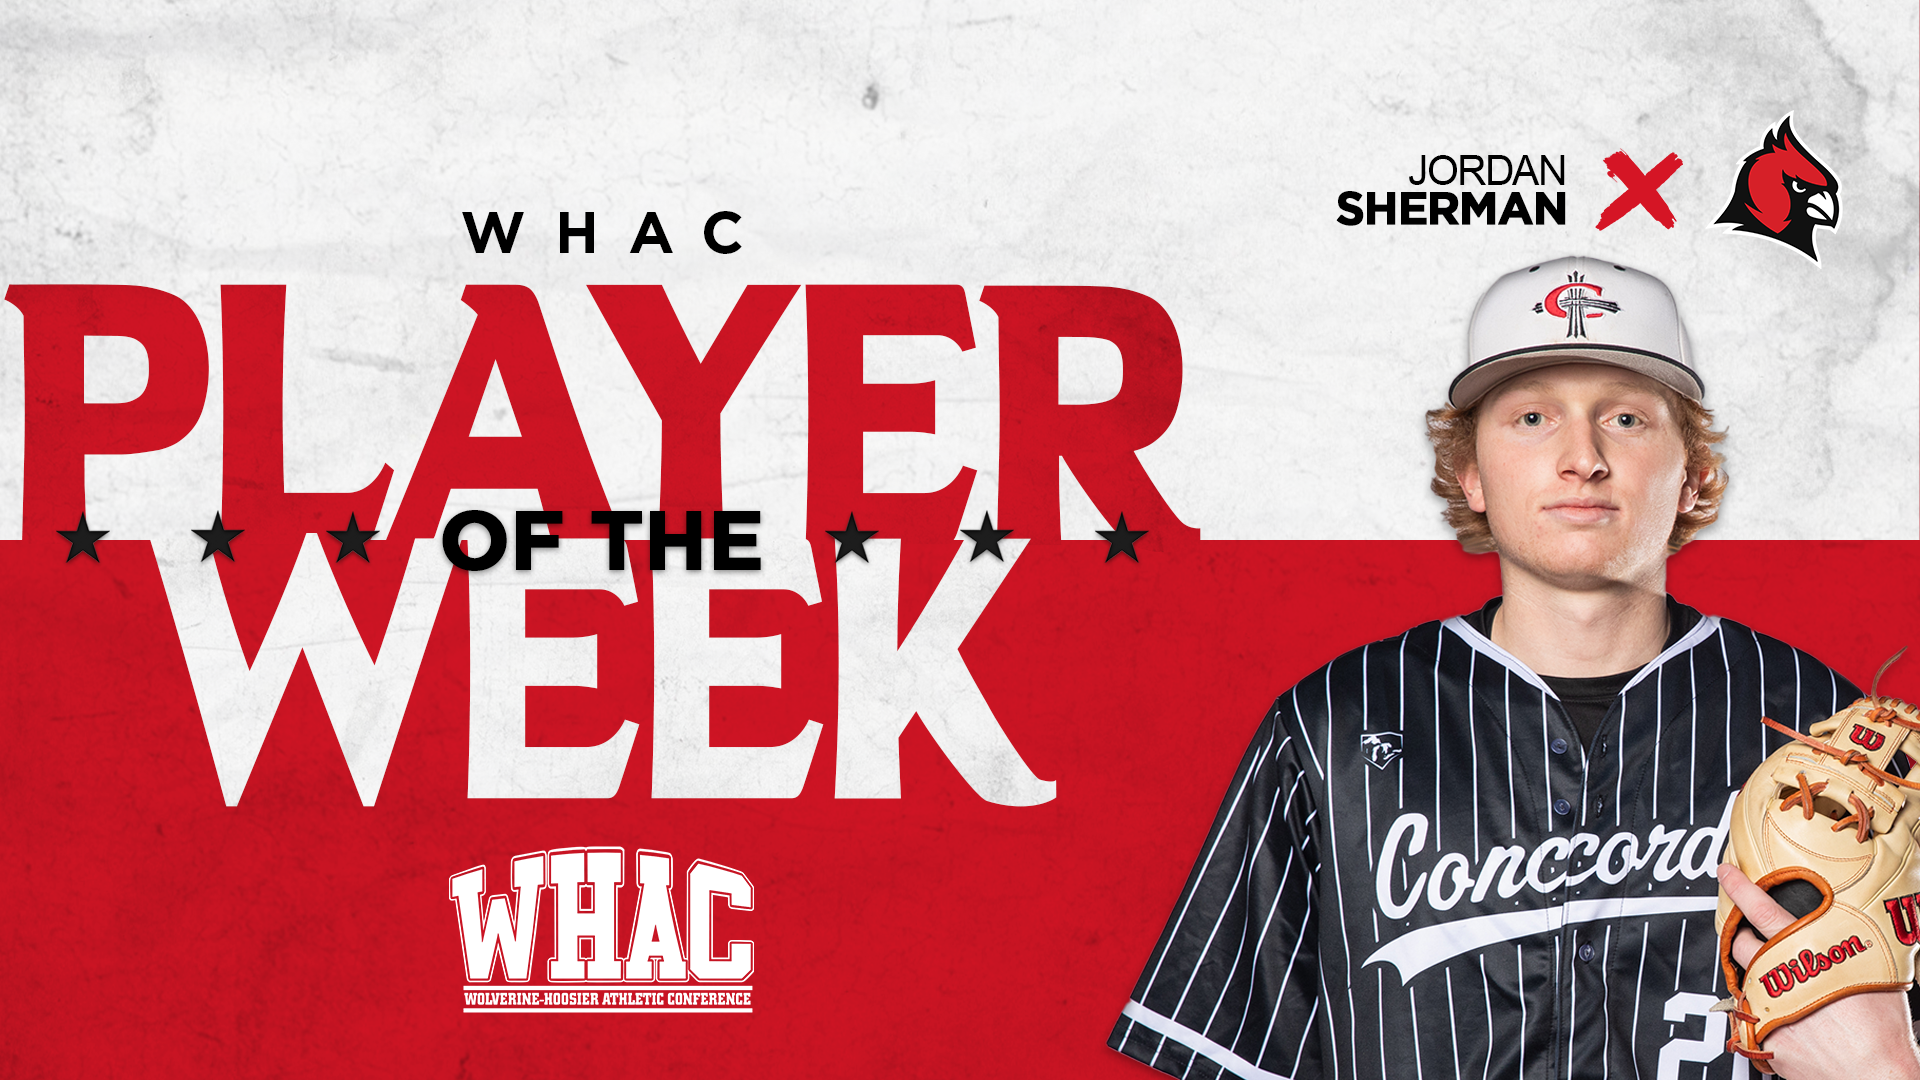 Sherman named WHAC Player of the Week